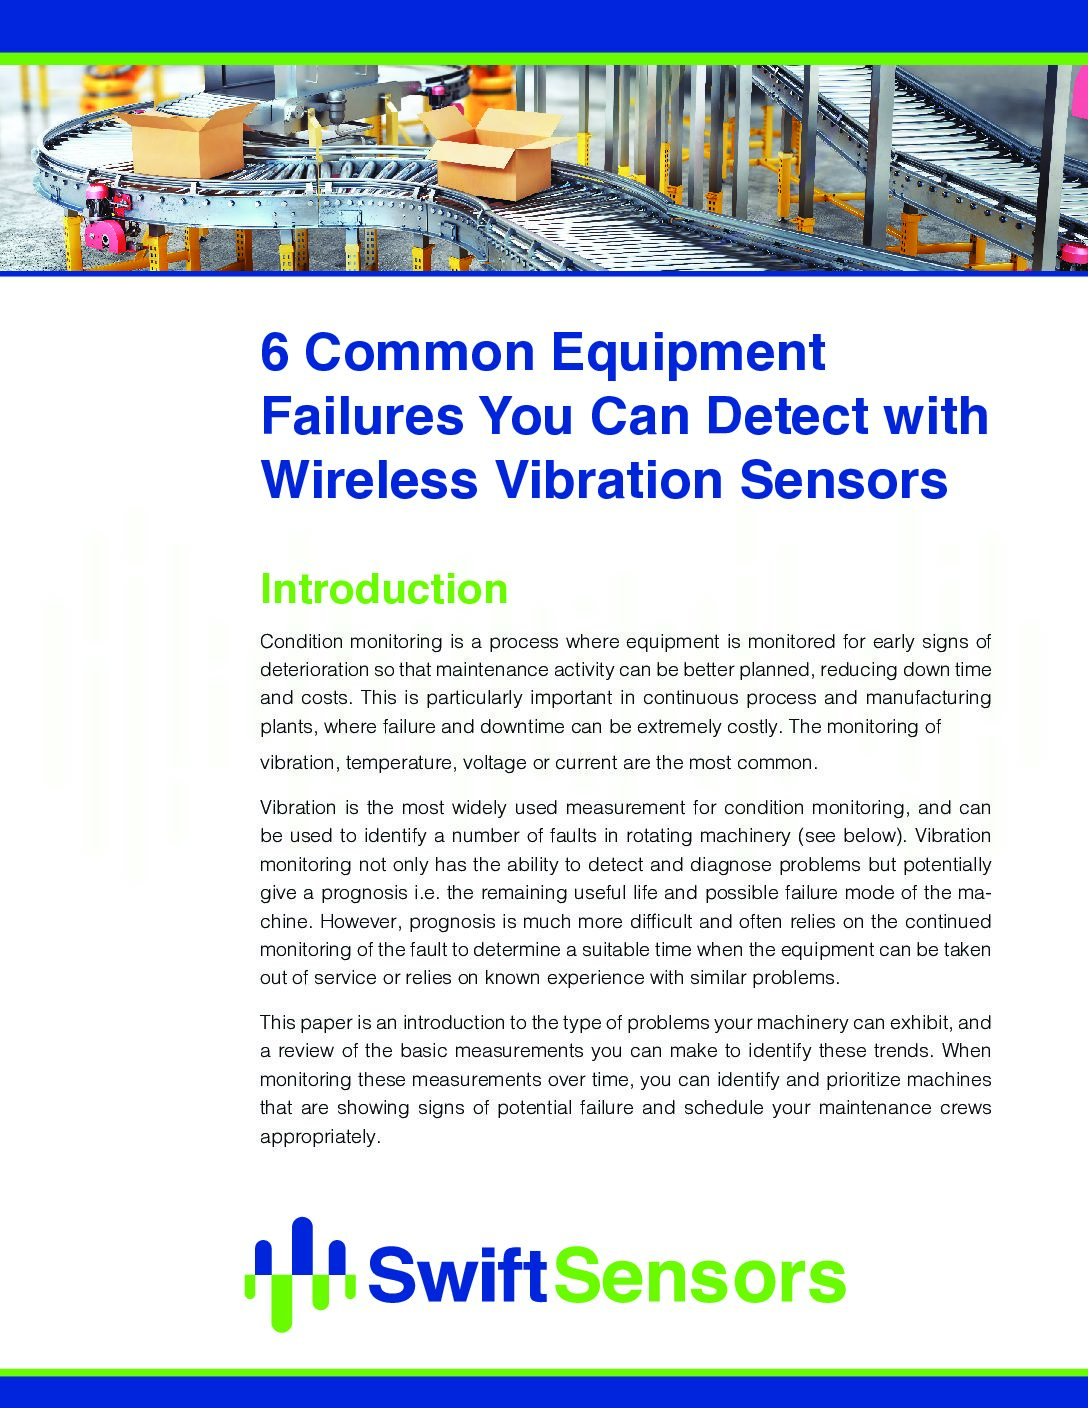 Swift Sensors 6 Common Equipment Failures You Can Detect with Wireless Vibration Sensors Whitepaper